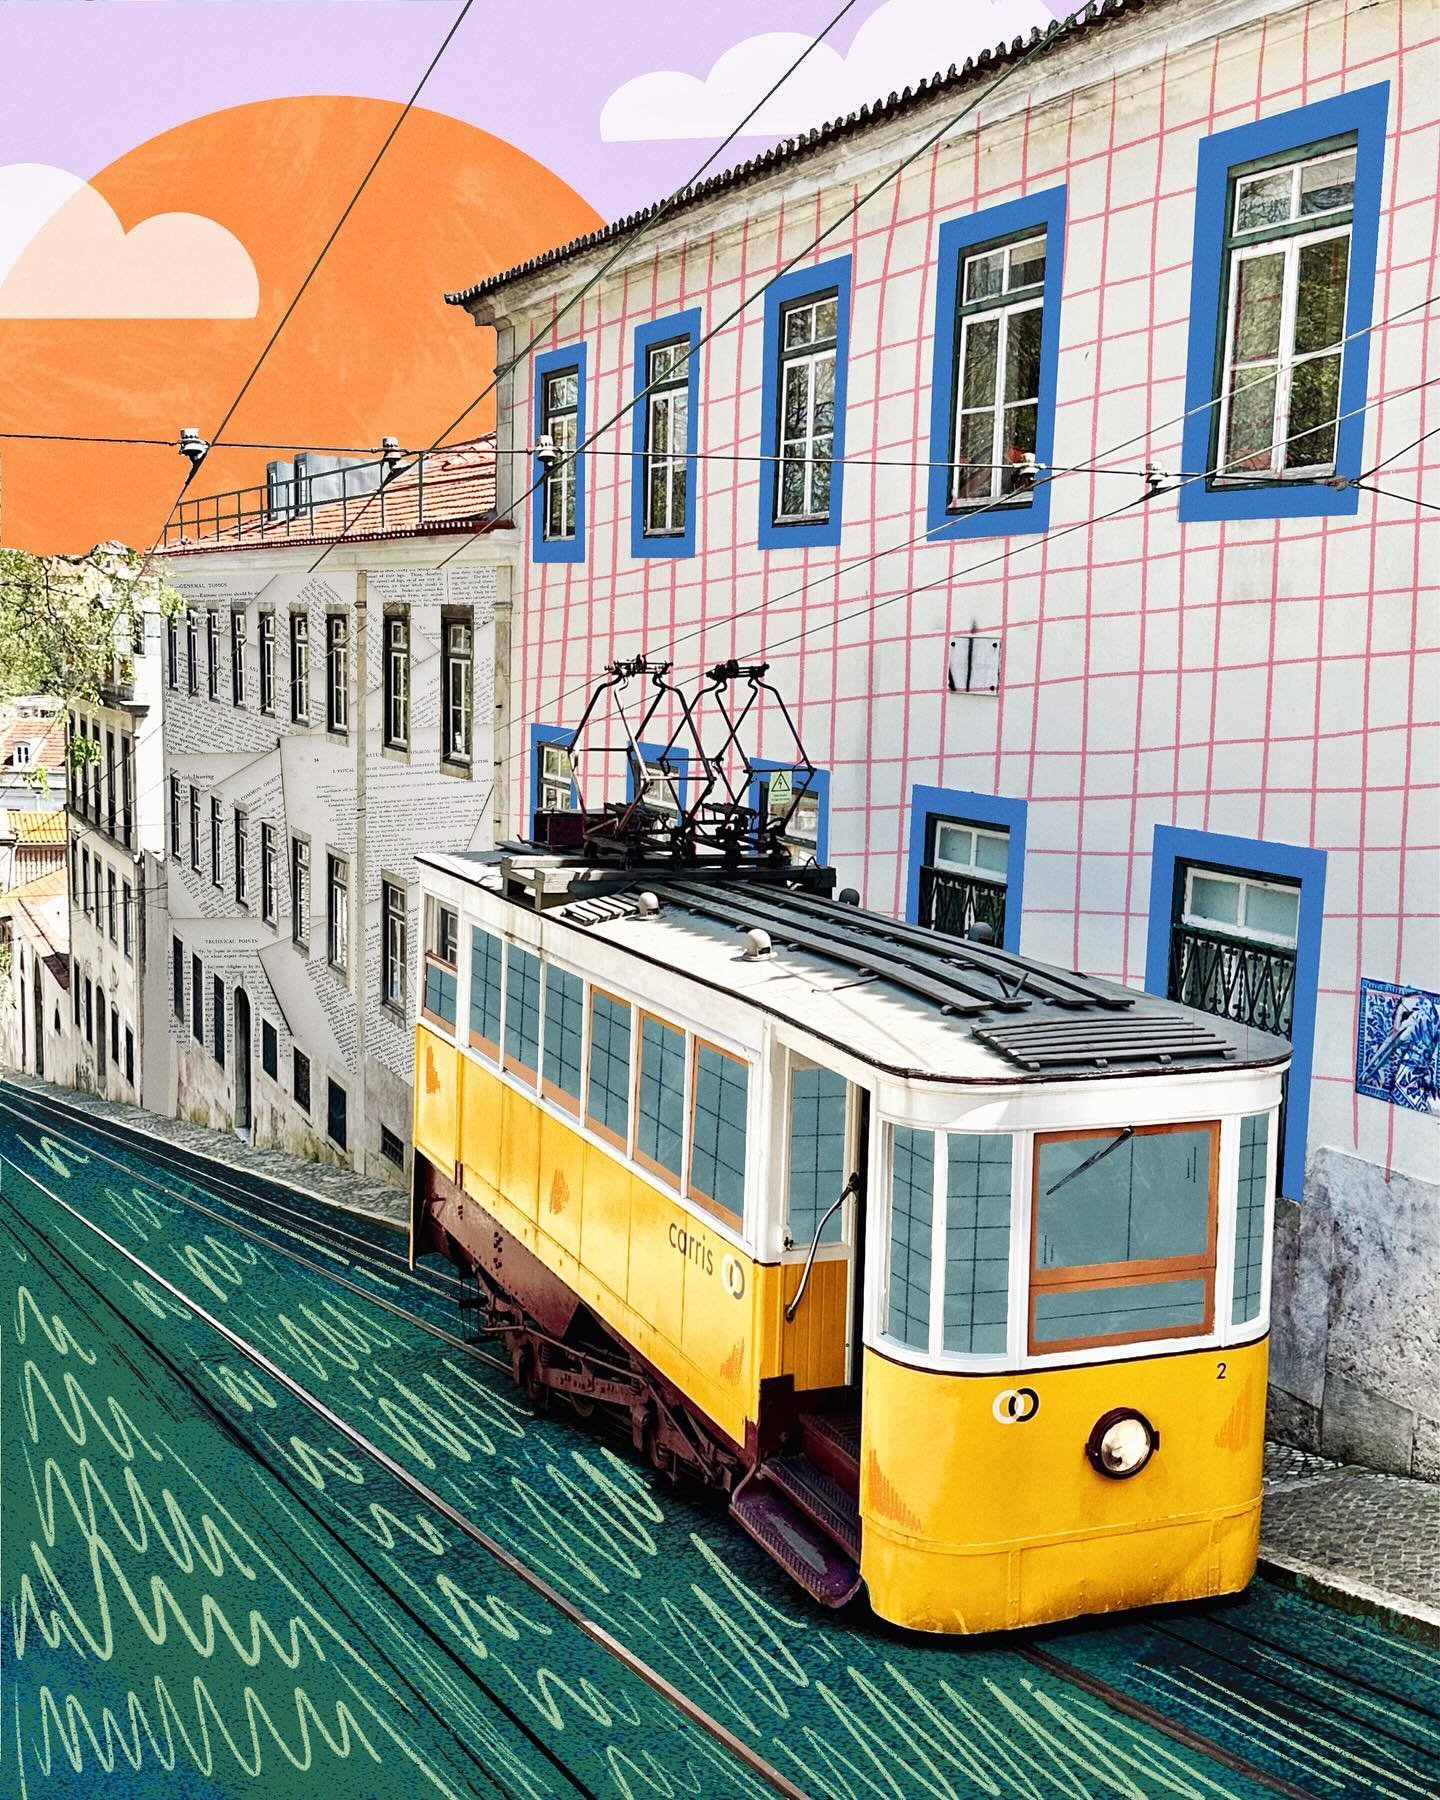 Back from a recent holiday to Lisbon so of course I had to use one of my travel photos for a new digital collage&hellip;

📍Lisbon, Portugal 

Shot on iPhone, made in Procreate 

#collage #digitalcollage #procreate #shotoniphone #lisboa #lisbon #trav